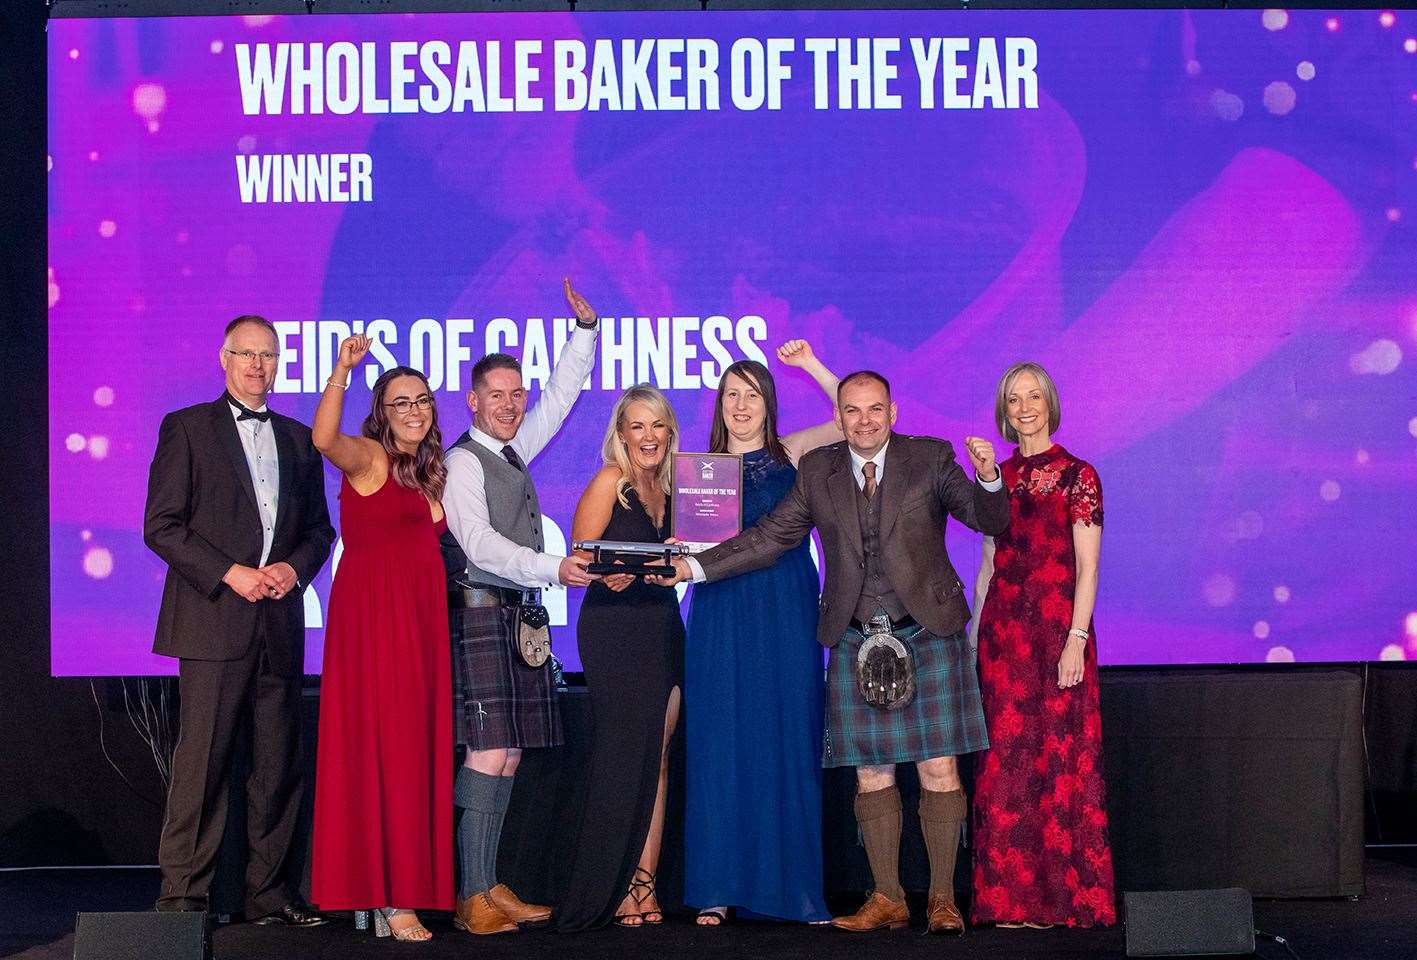 Reid's of Caithness won the Wholesale Baker of the Year award